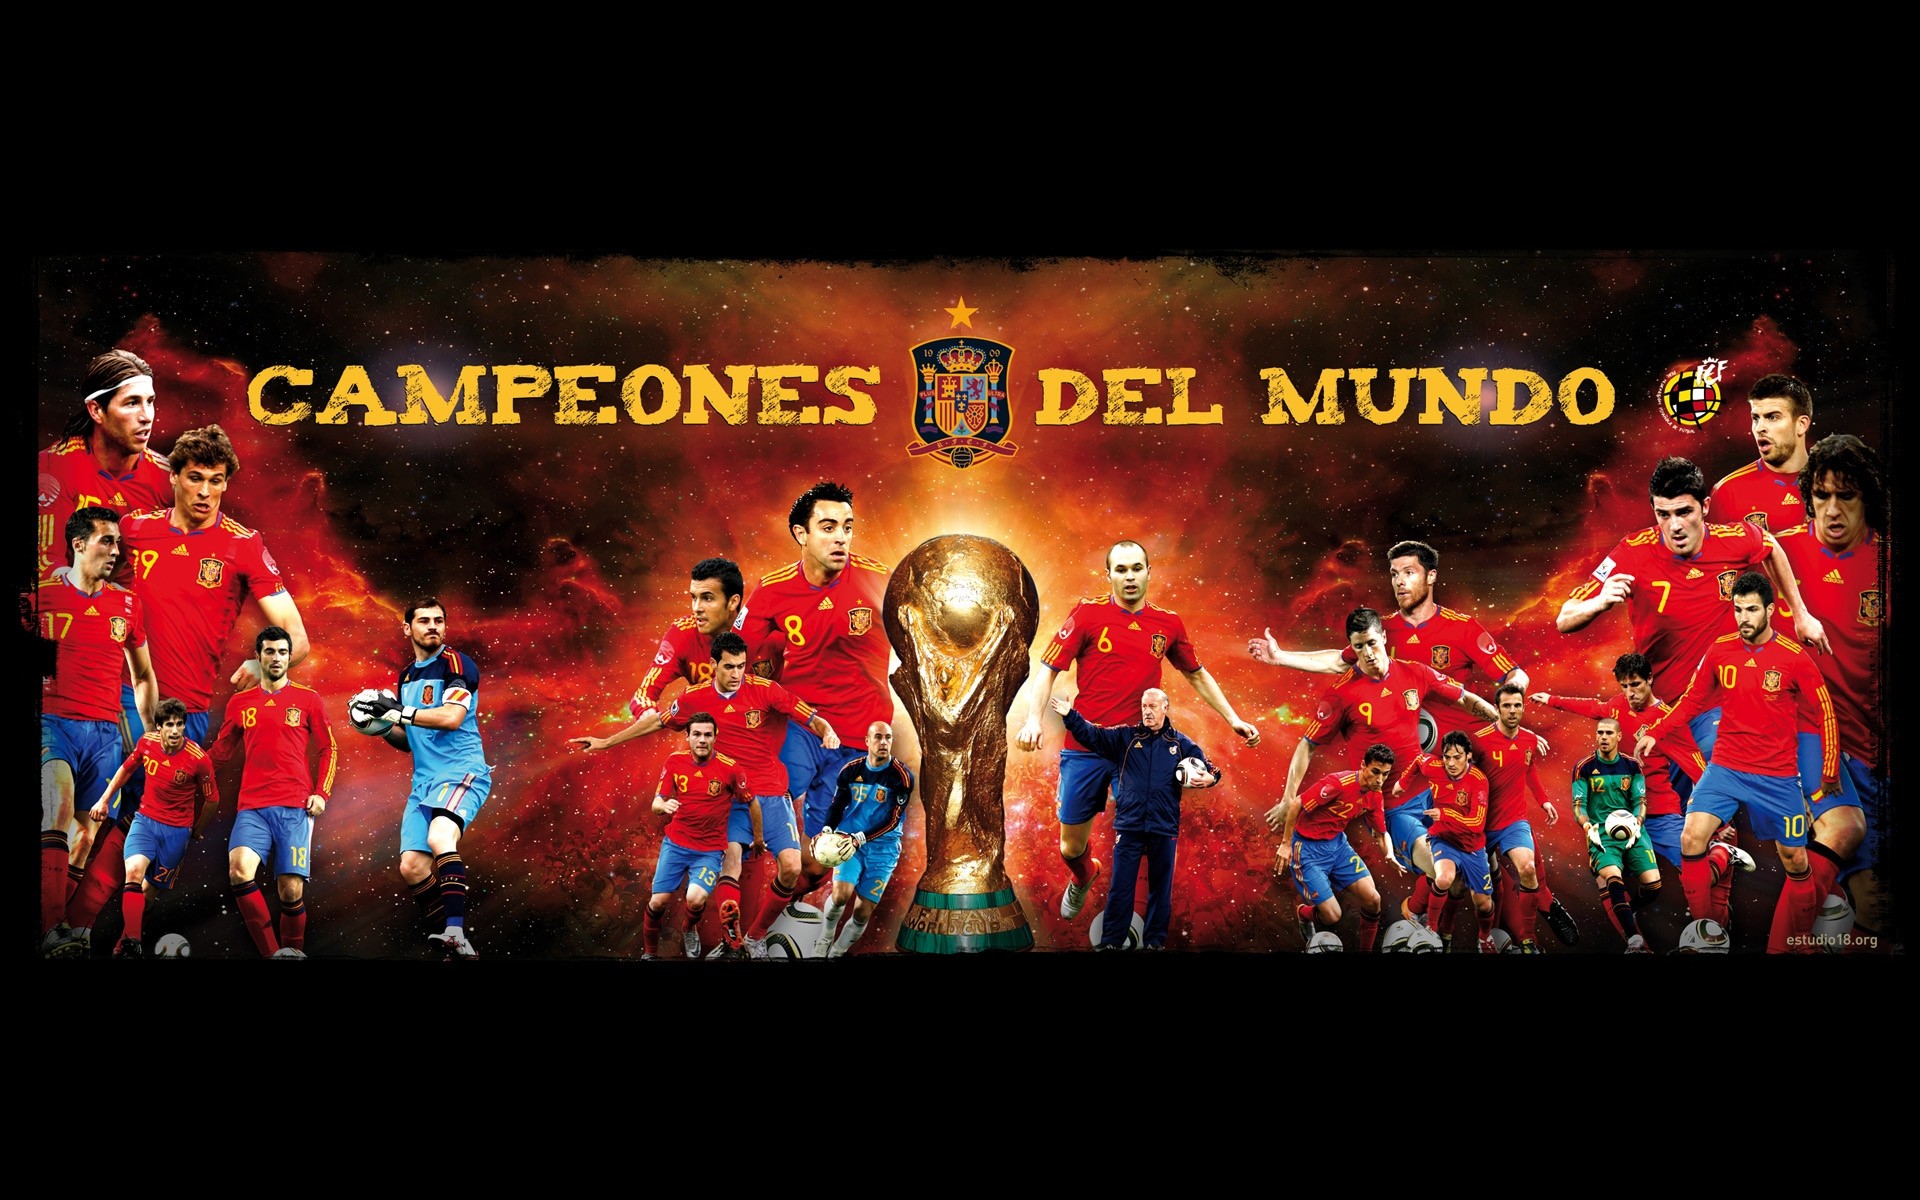 1920x1200 ... Spain Football Wallpapers, HD Images Spain Football Collection, W ..